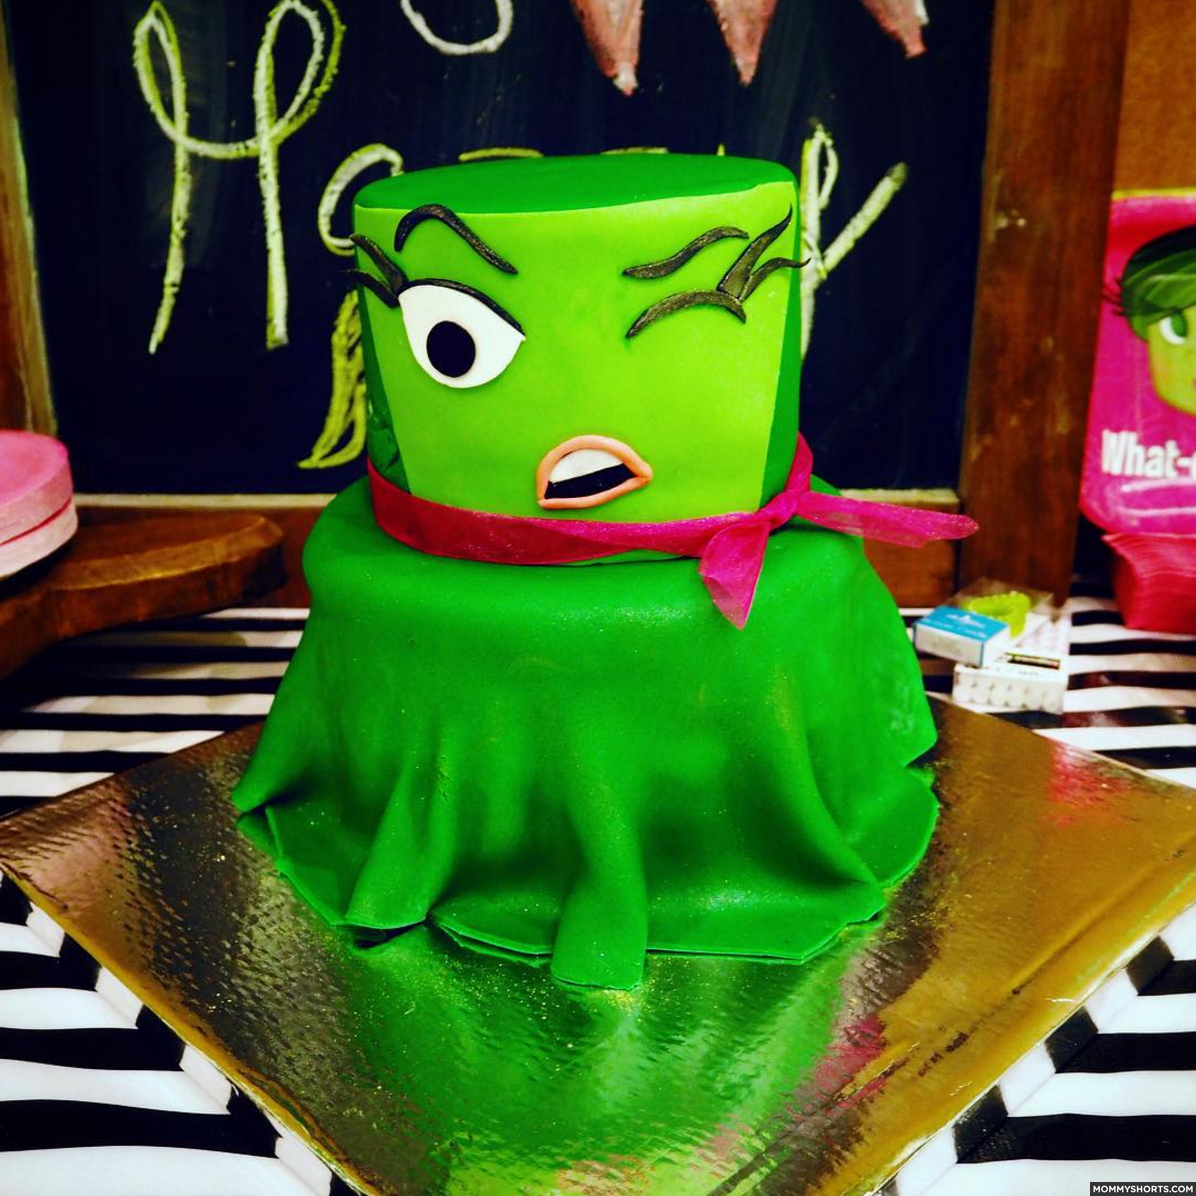 Awesome Disgust cake for a 6th birthday party!